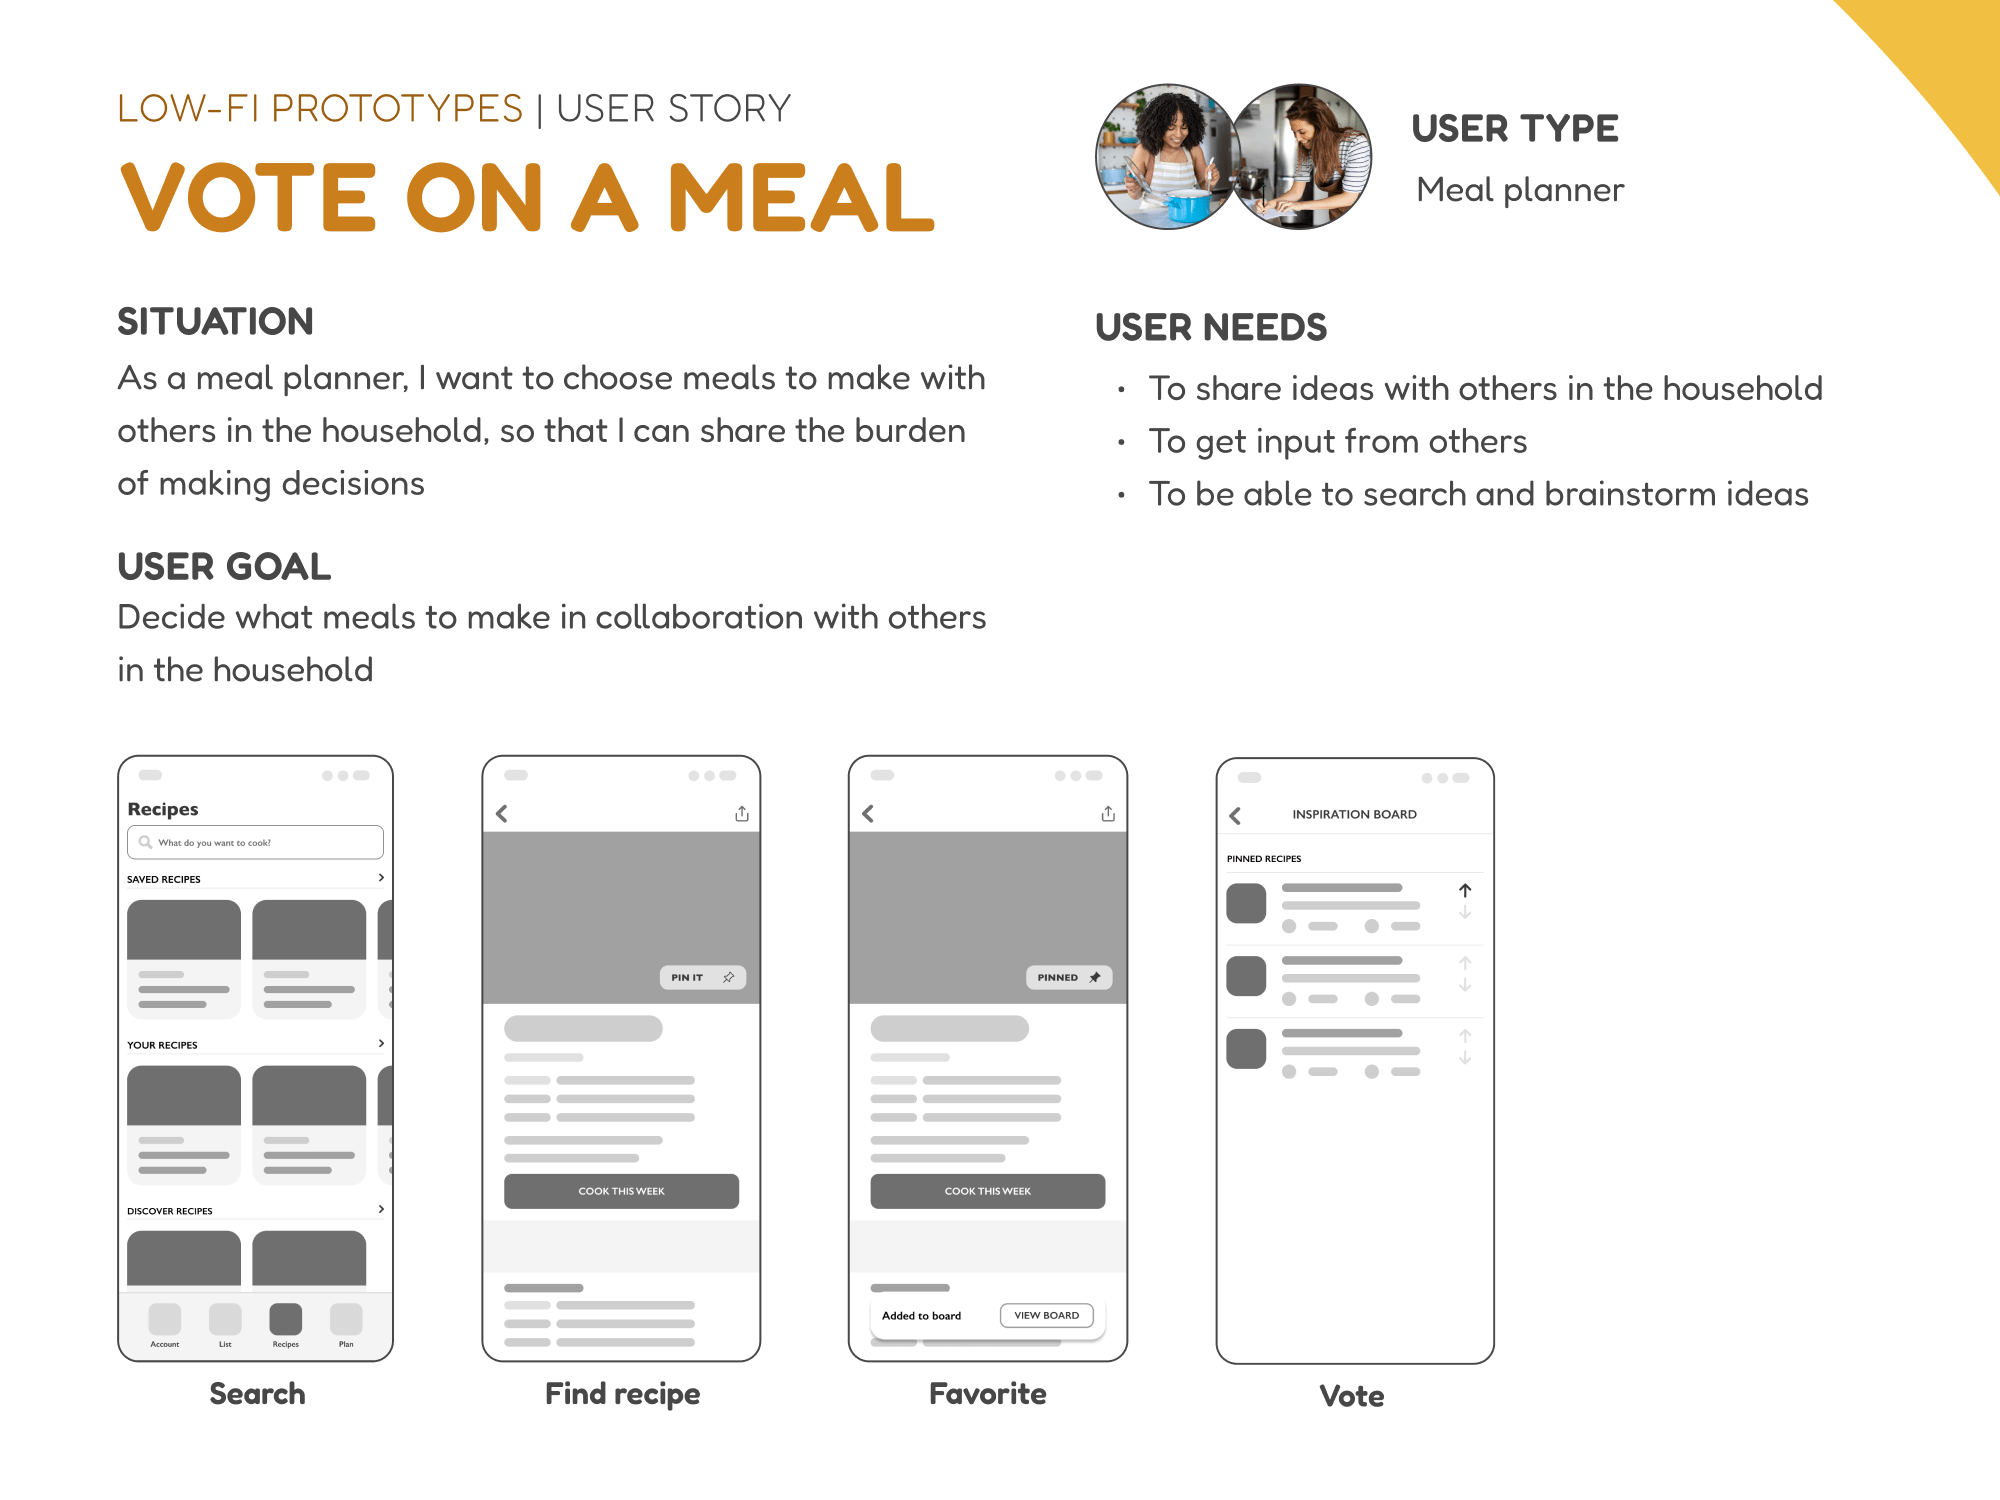 A user story for the meal planner to vote on a meal. The situation is that the meal planner wants input from others in the household so that they can share the burden of making decisions.